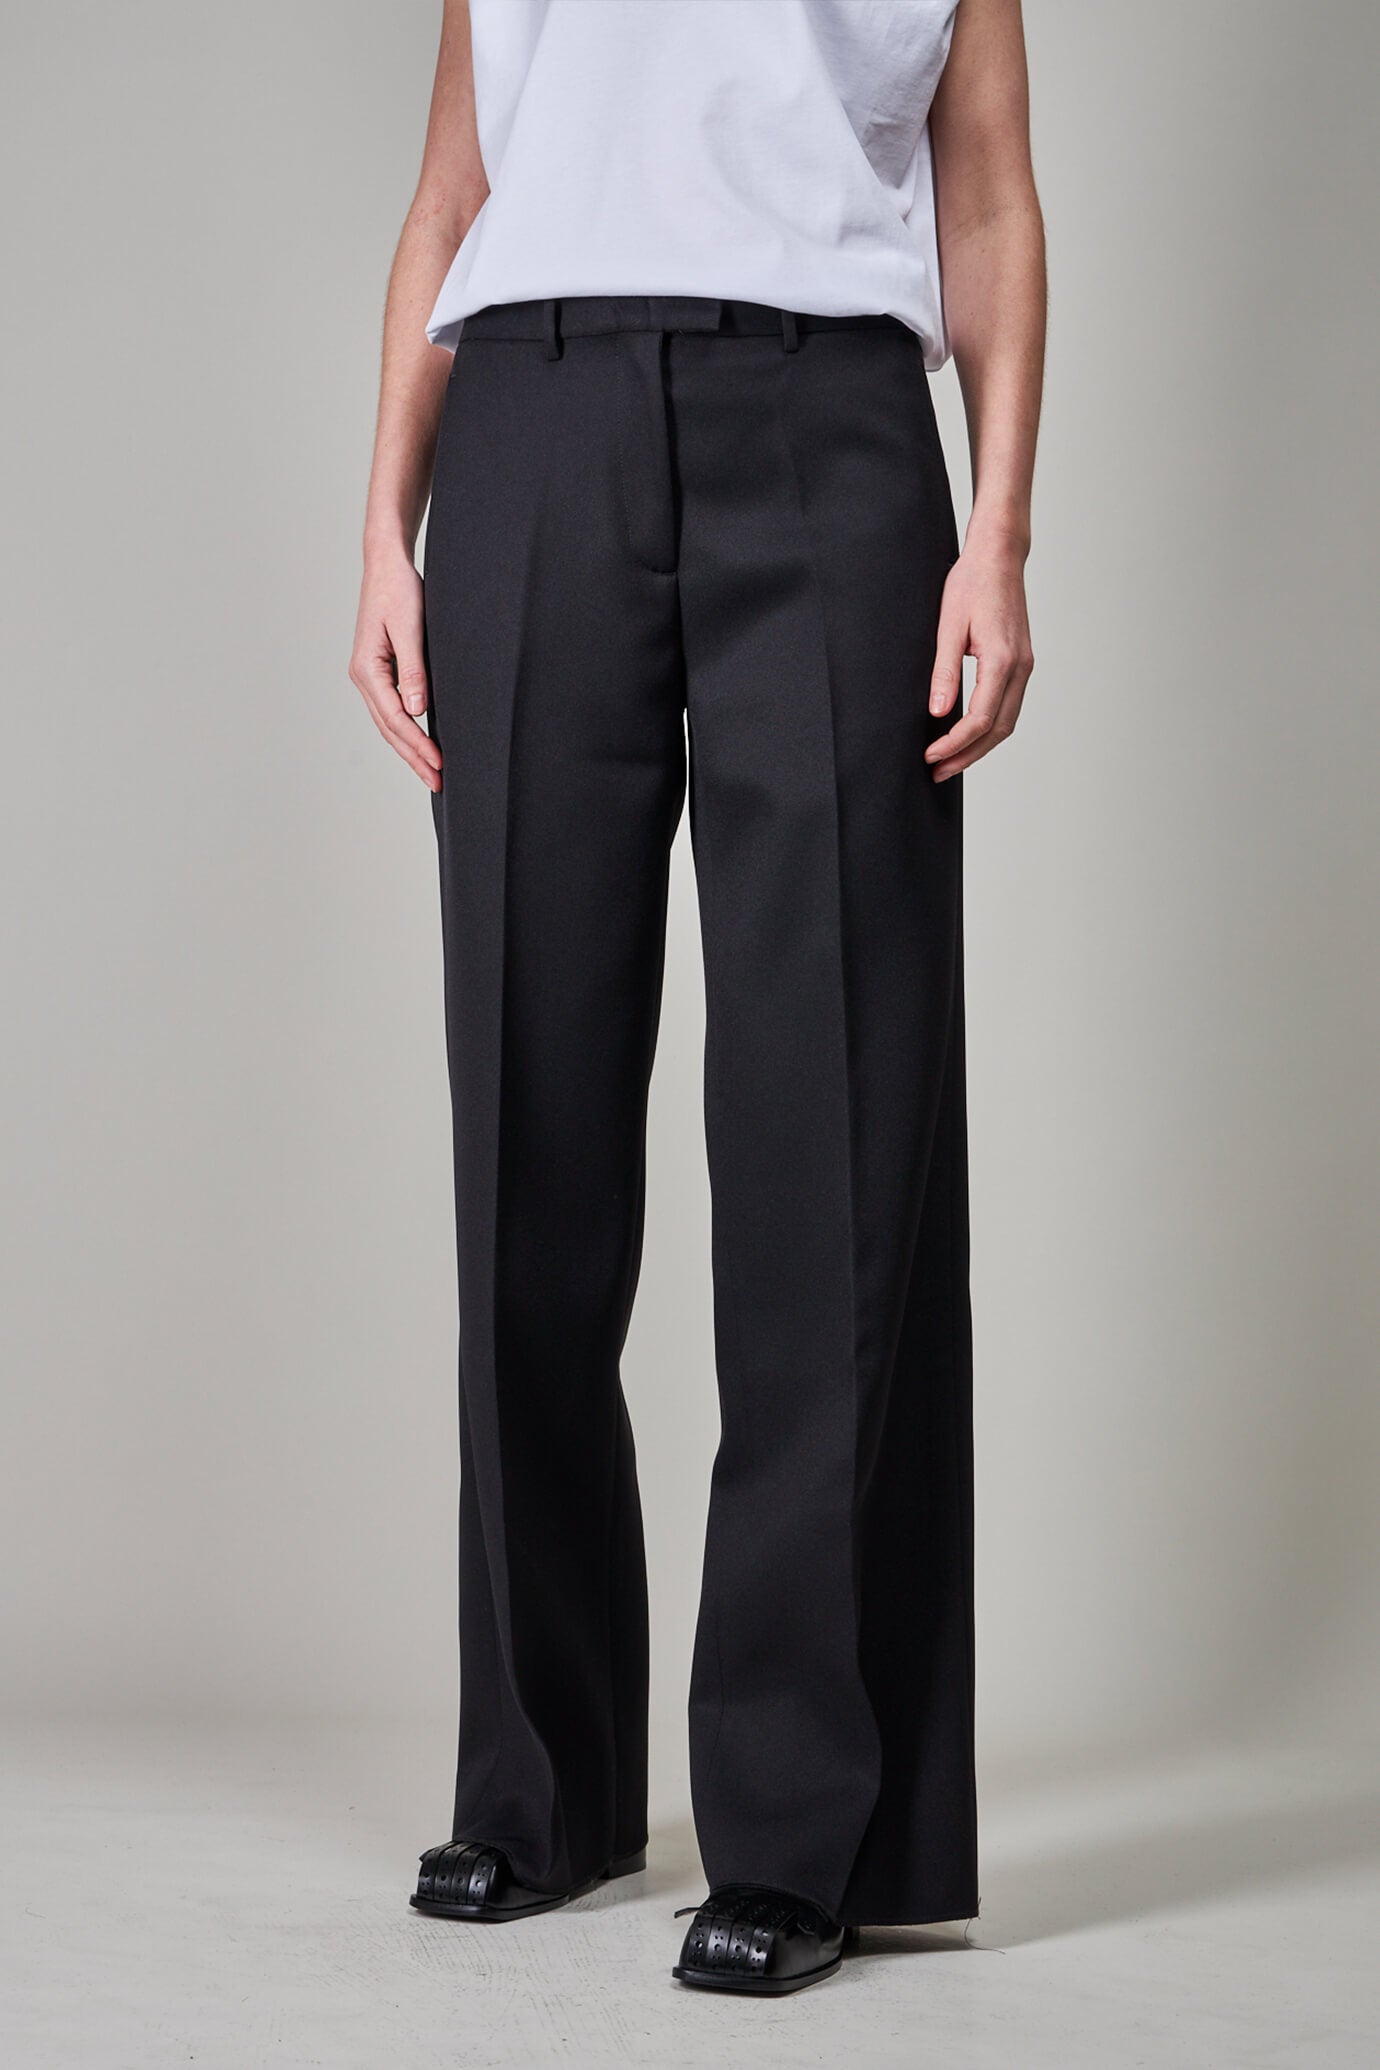 Classic Wide Leg Pants with 2 Back Pockets, black